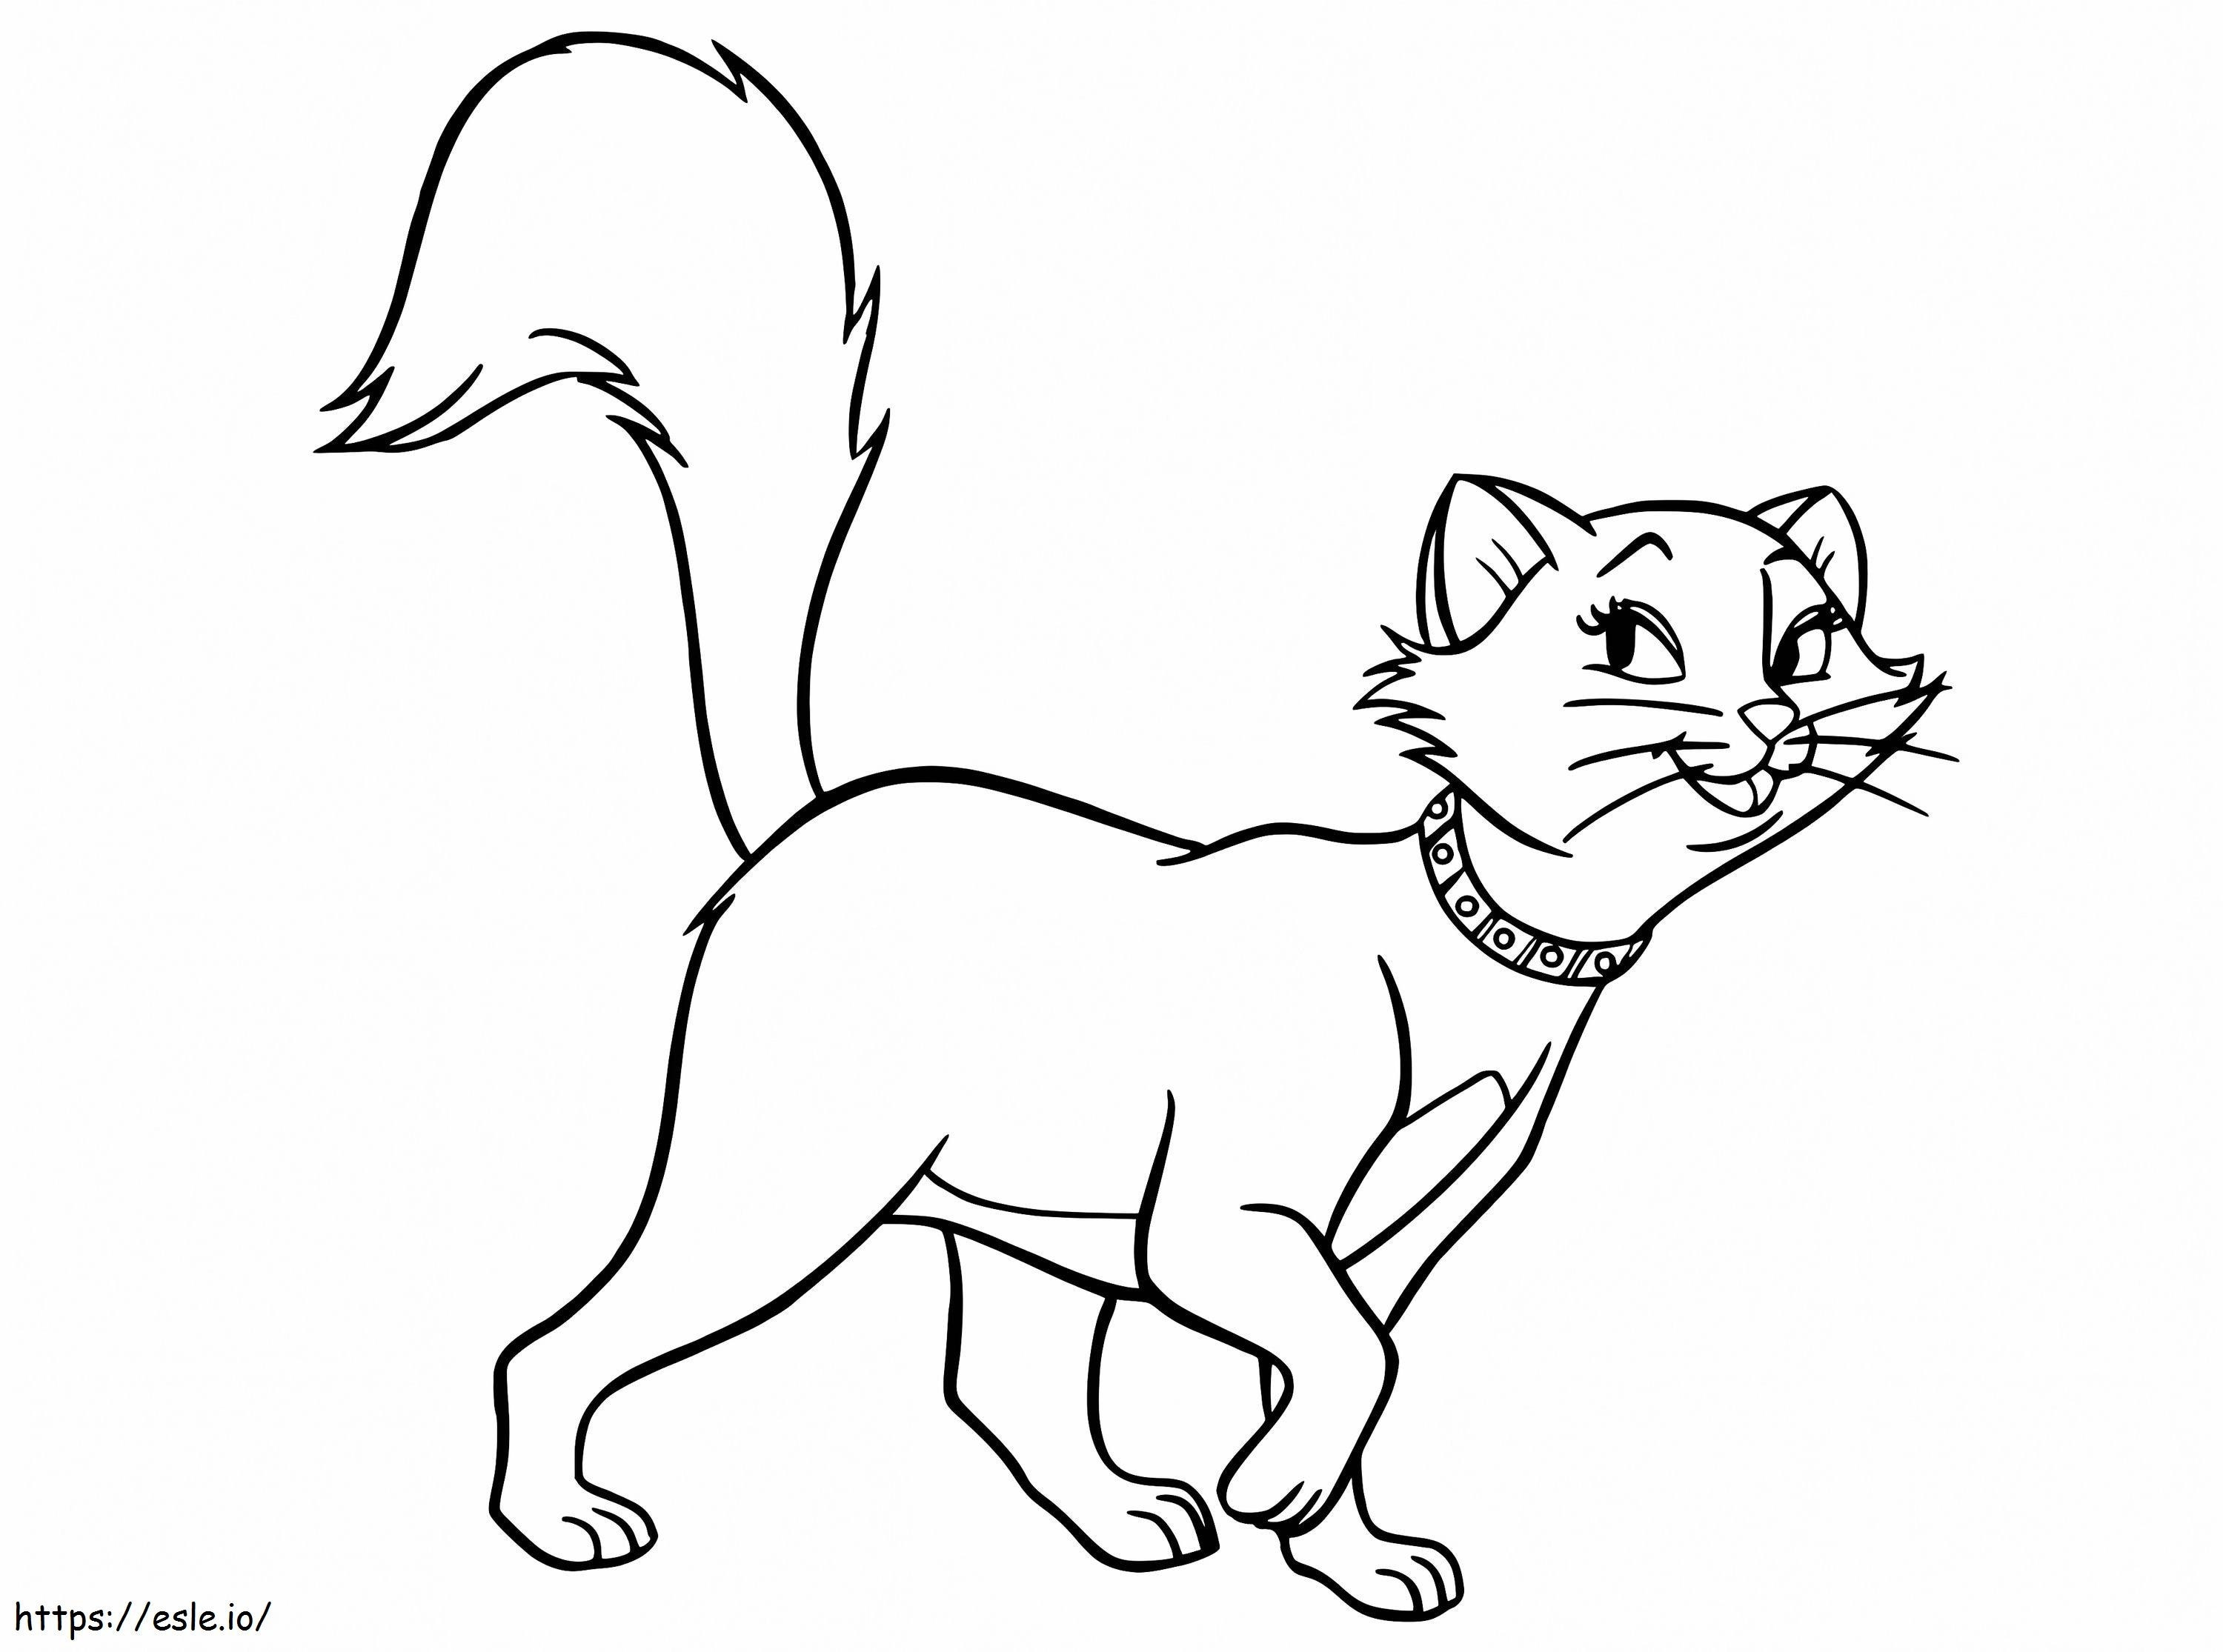 1599178554 Duchess Coloring2 coloring page